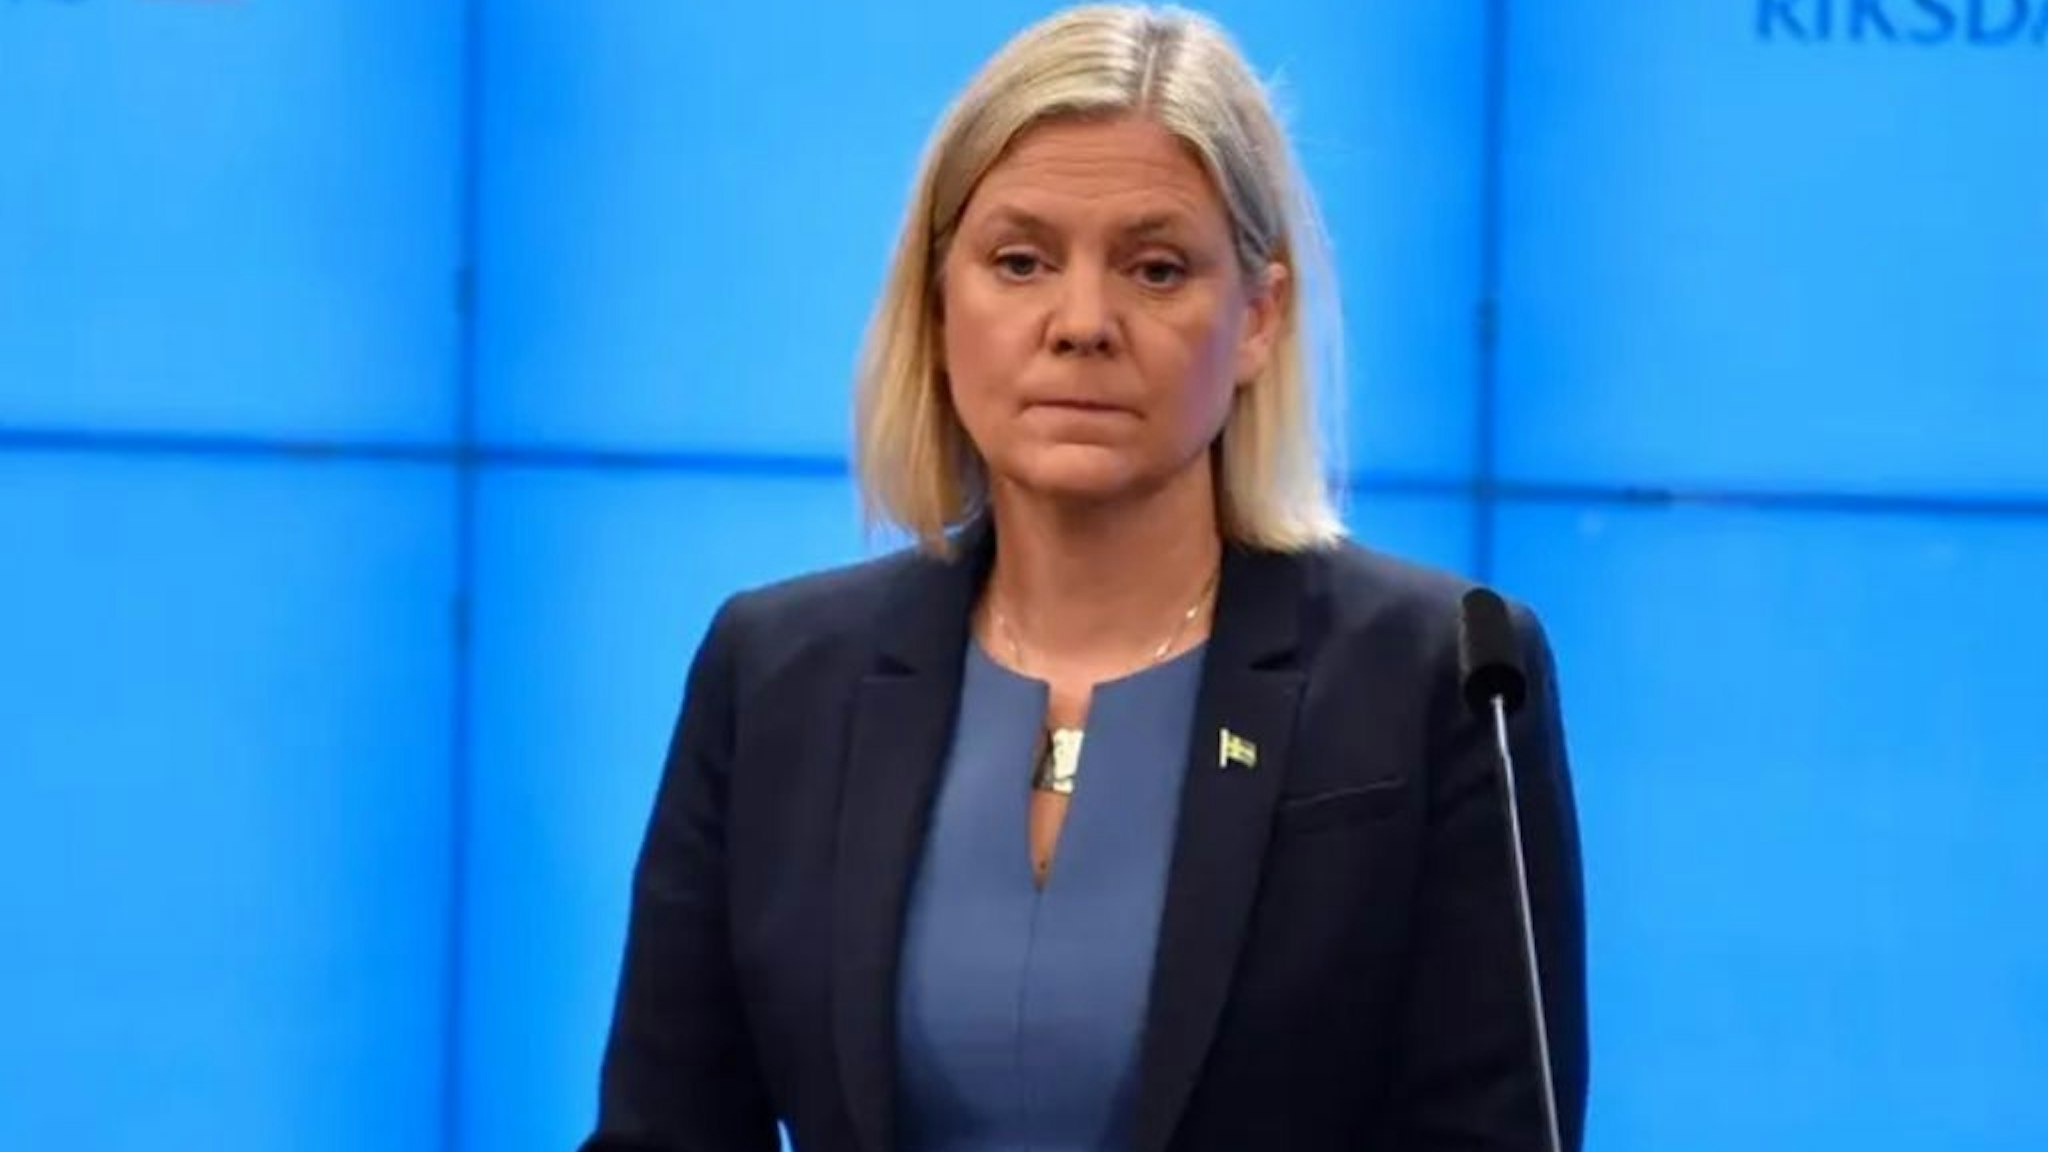 A screen grab captured from a video shows Magdalena Andersson, the first female prime minister in Sweden speaking during a press conference in Stockholm, Sweden on November 24, 2021.